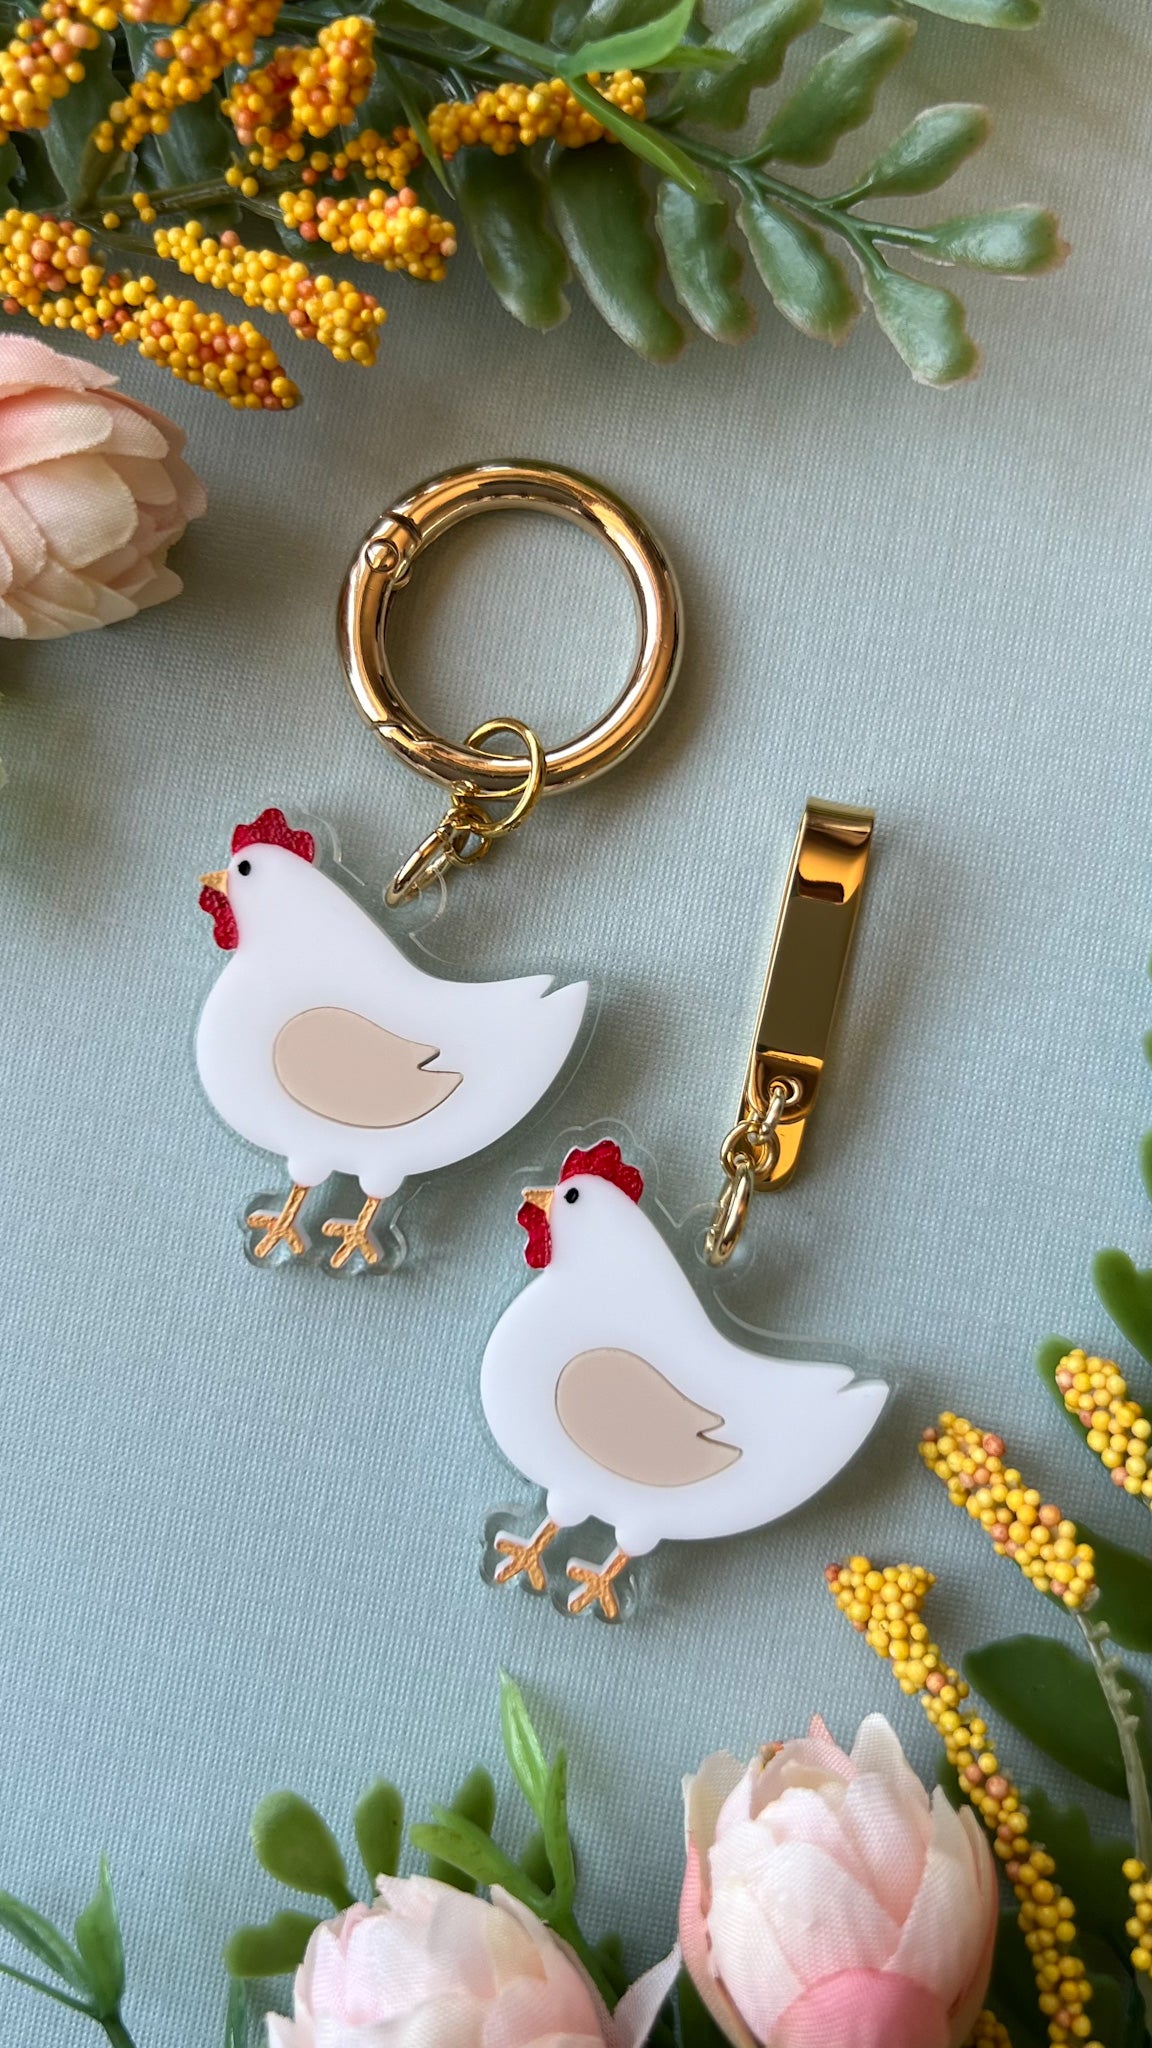 White Chicken Shoe Accessory | Pull Loop, Shoe Charm, High Top Sneaker or Boot Clip, Shoe or Bag Keychain